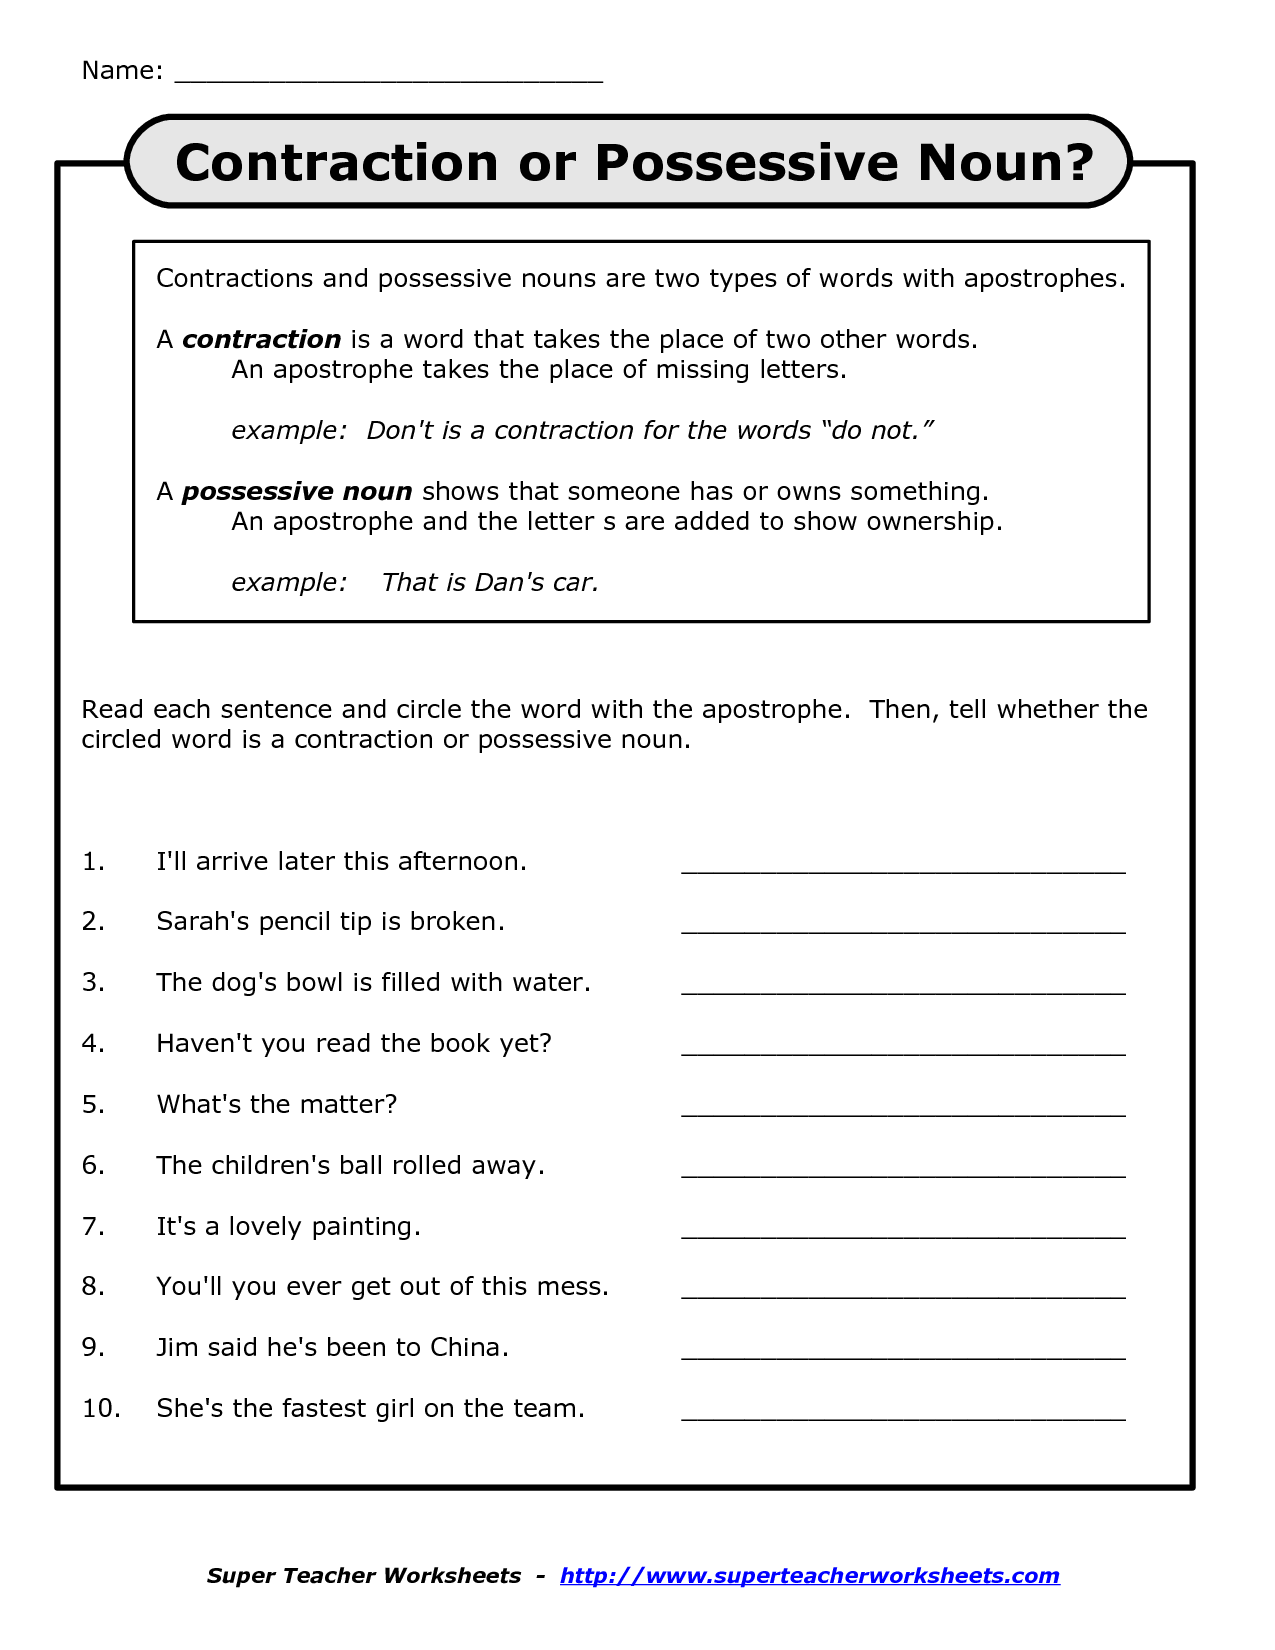 search-results-for-possessive-nouns-worksheets-4th-grade-calendar-2015